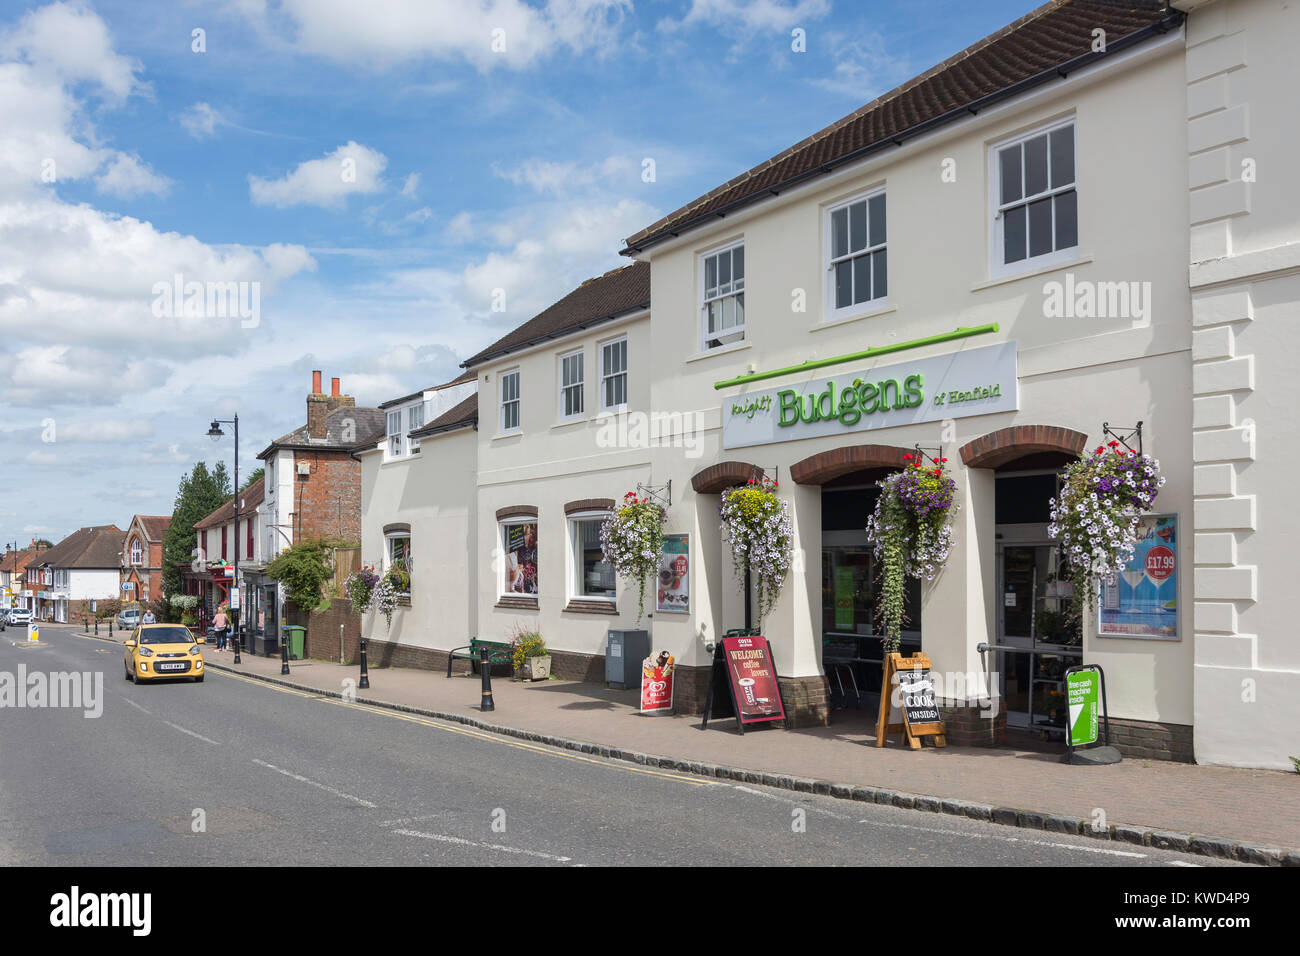 Knight's Budgens of Henfield supermarket, High Street, Henfield, West Sussex, England, United Kingdom Stock Photo